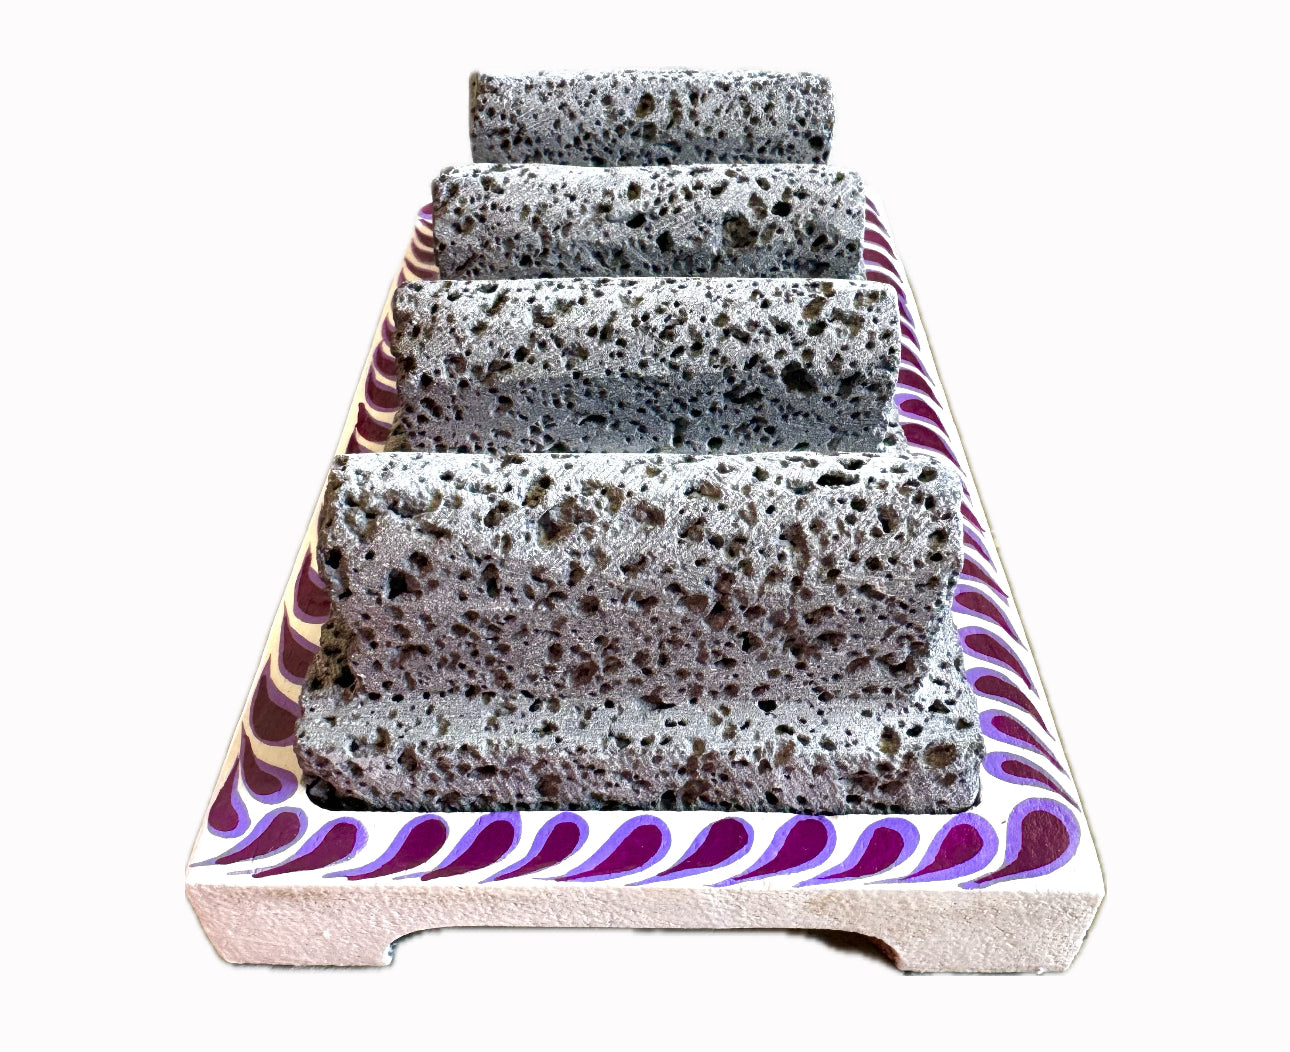 Mexican Volcanic Rock and Parota 9" 3 Taco Holder Stand- Violet CoLores Decor l Mexican Artisan Decor